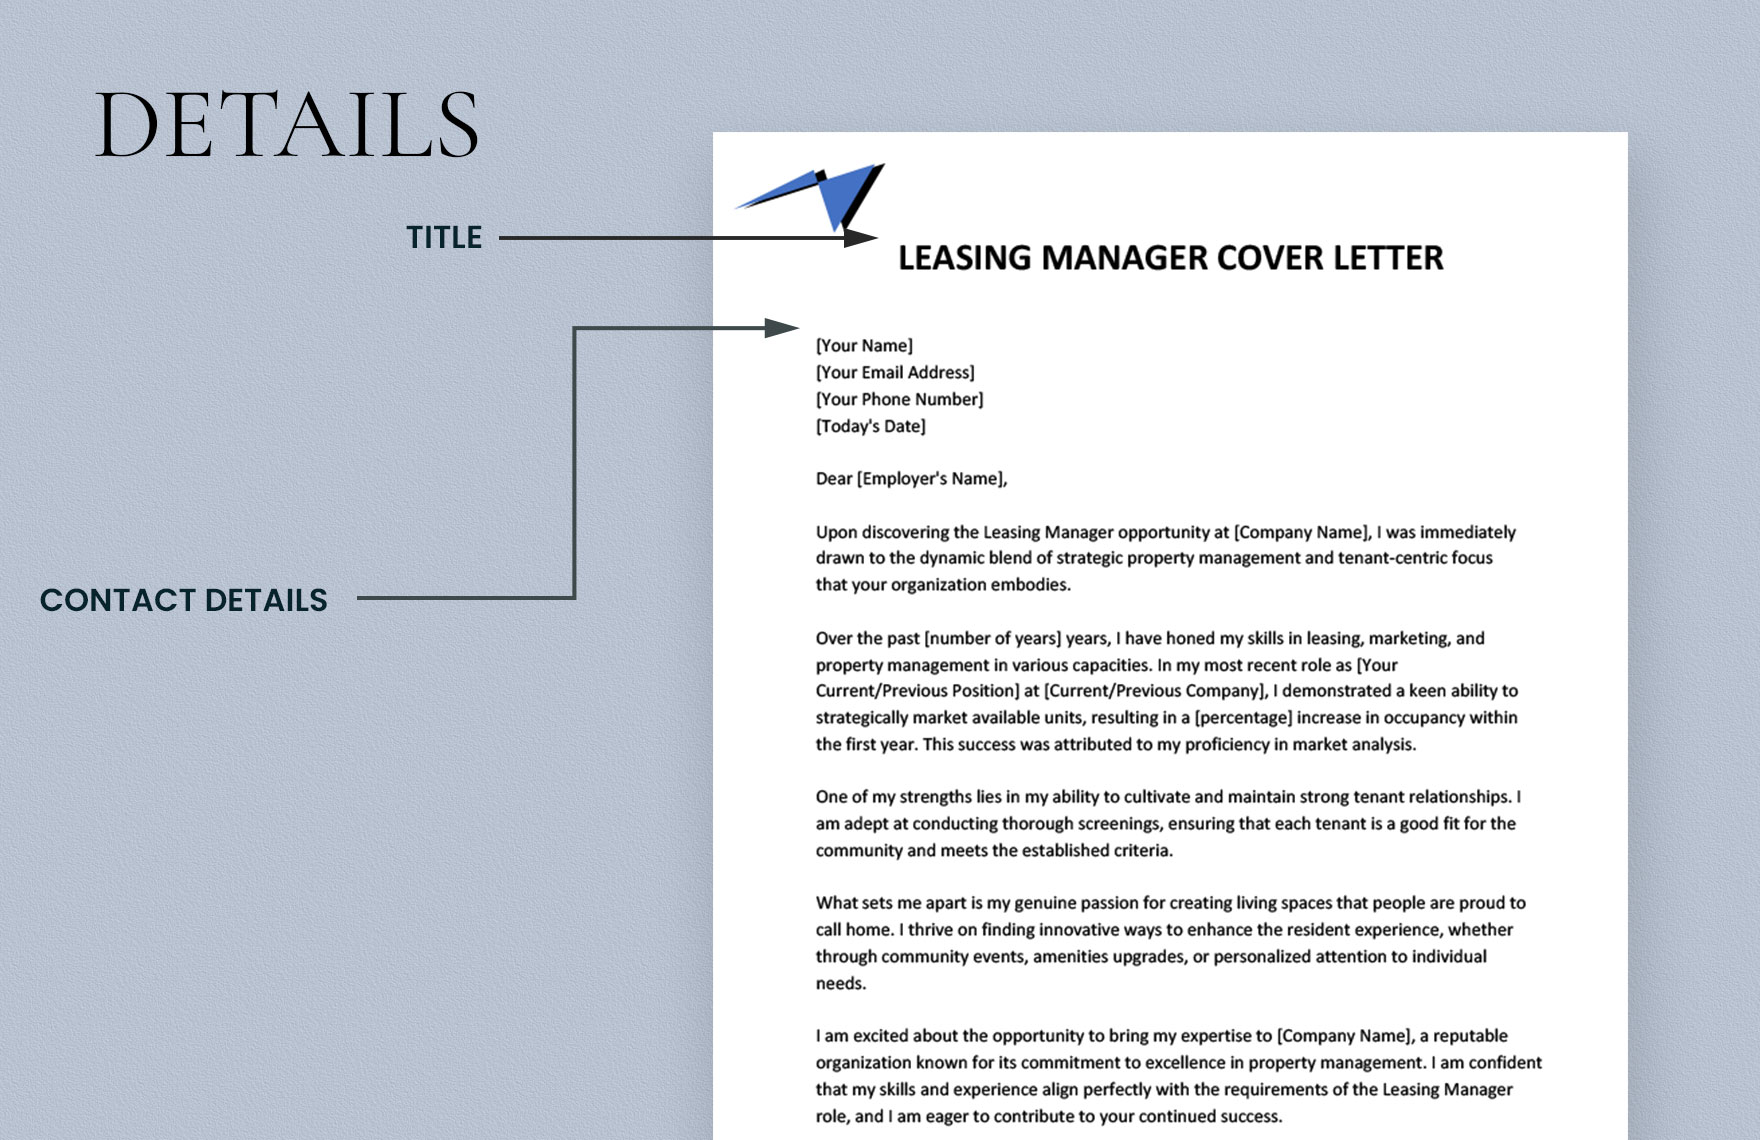 Leasing Manager Cover Letter